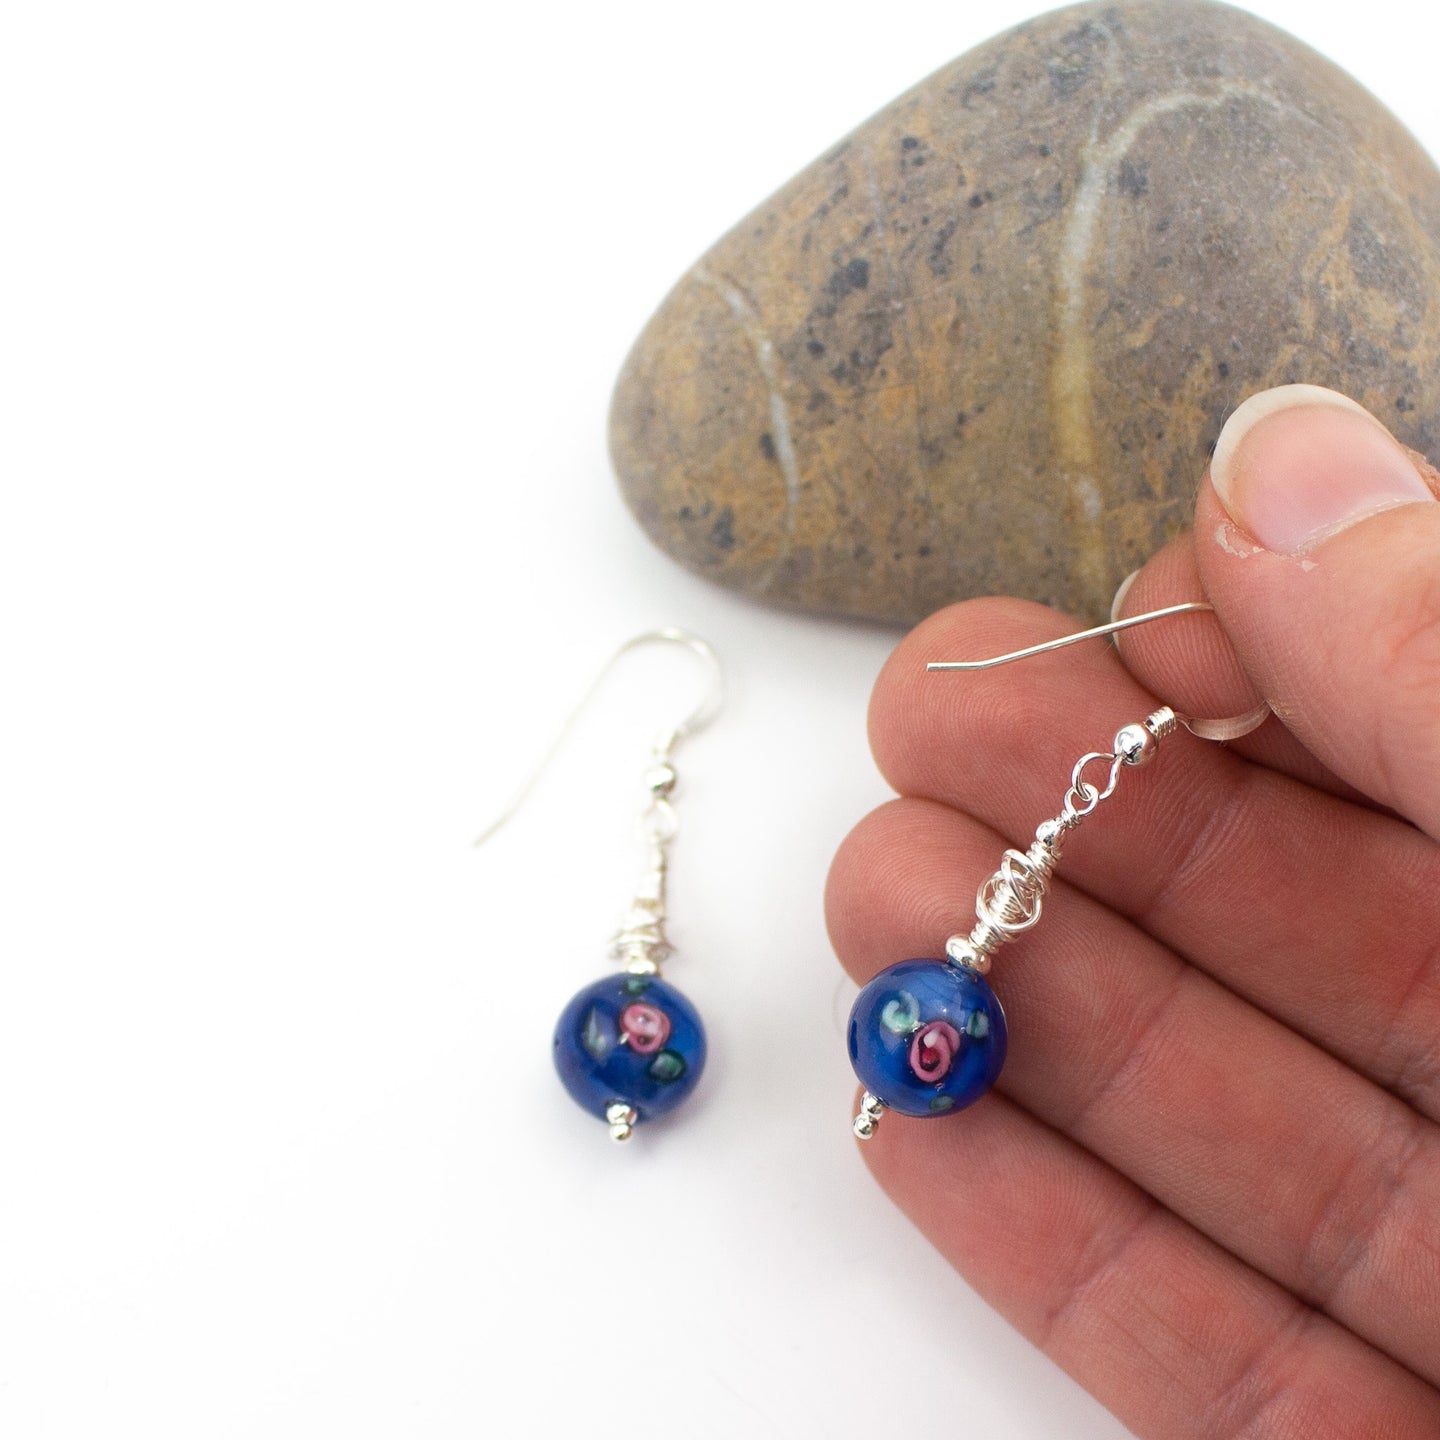 Short and Sweet Earrings with navy blue floral lampwork glass beads and handwrapped silver filled scribble beads. Sterling silver ear wires that come with backs. They are 2.5cm in drop length from the base of the earwires and come in a pretty gift pouch for safe keeping. Designed and Handmade in Dingle